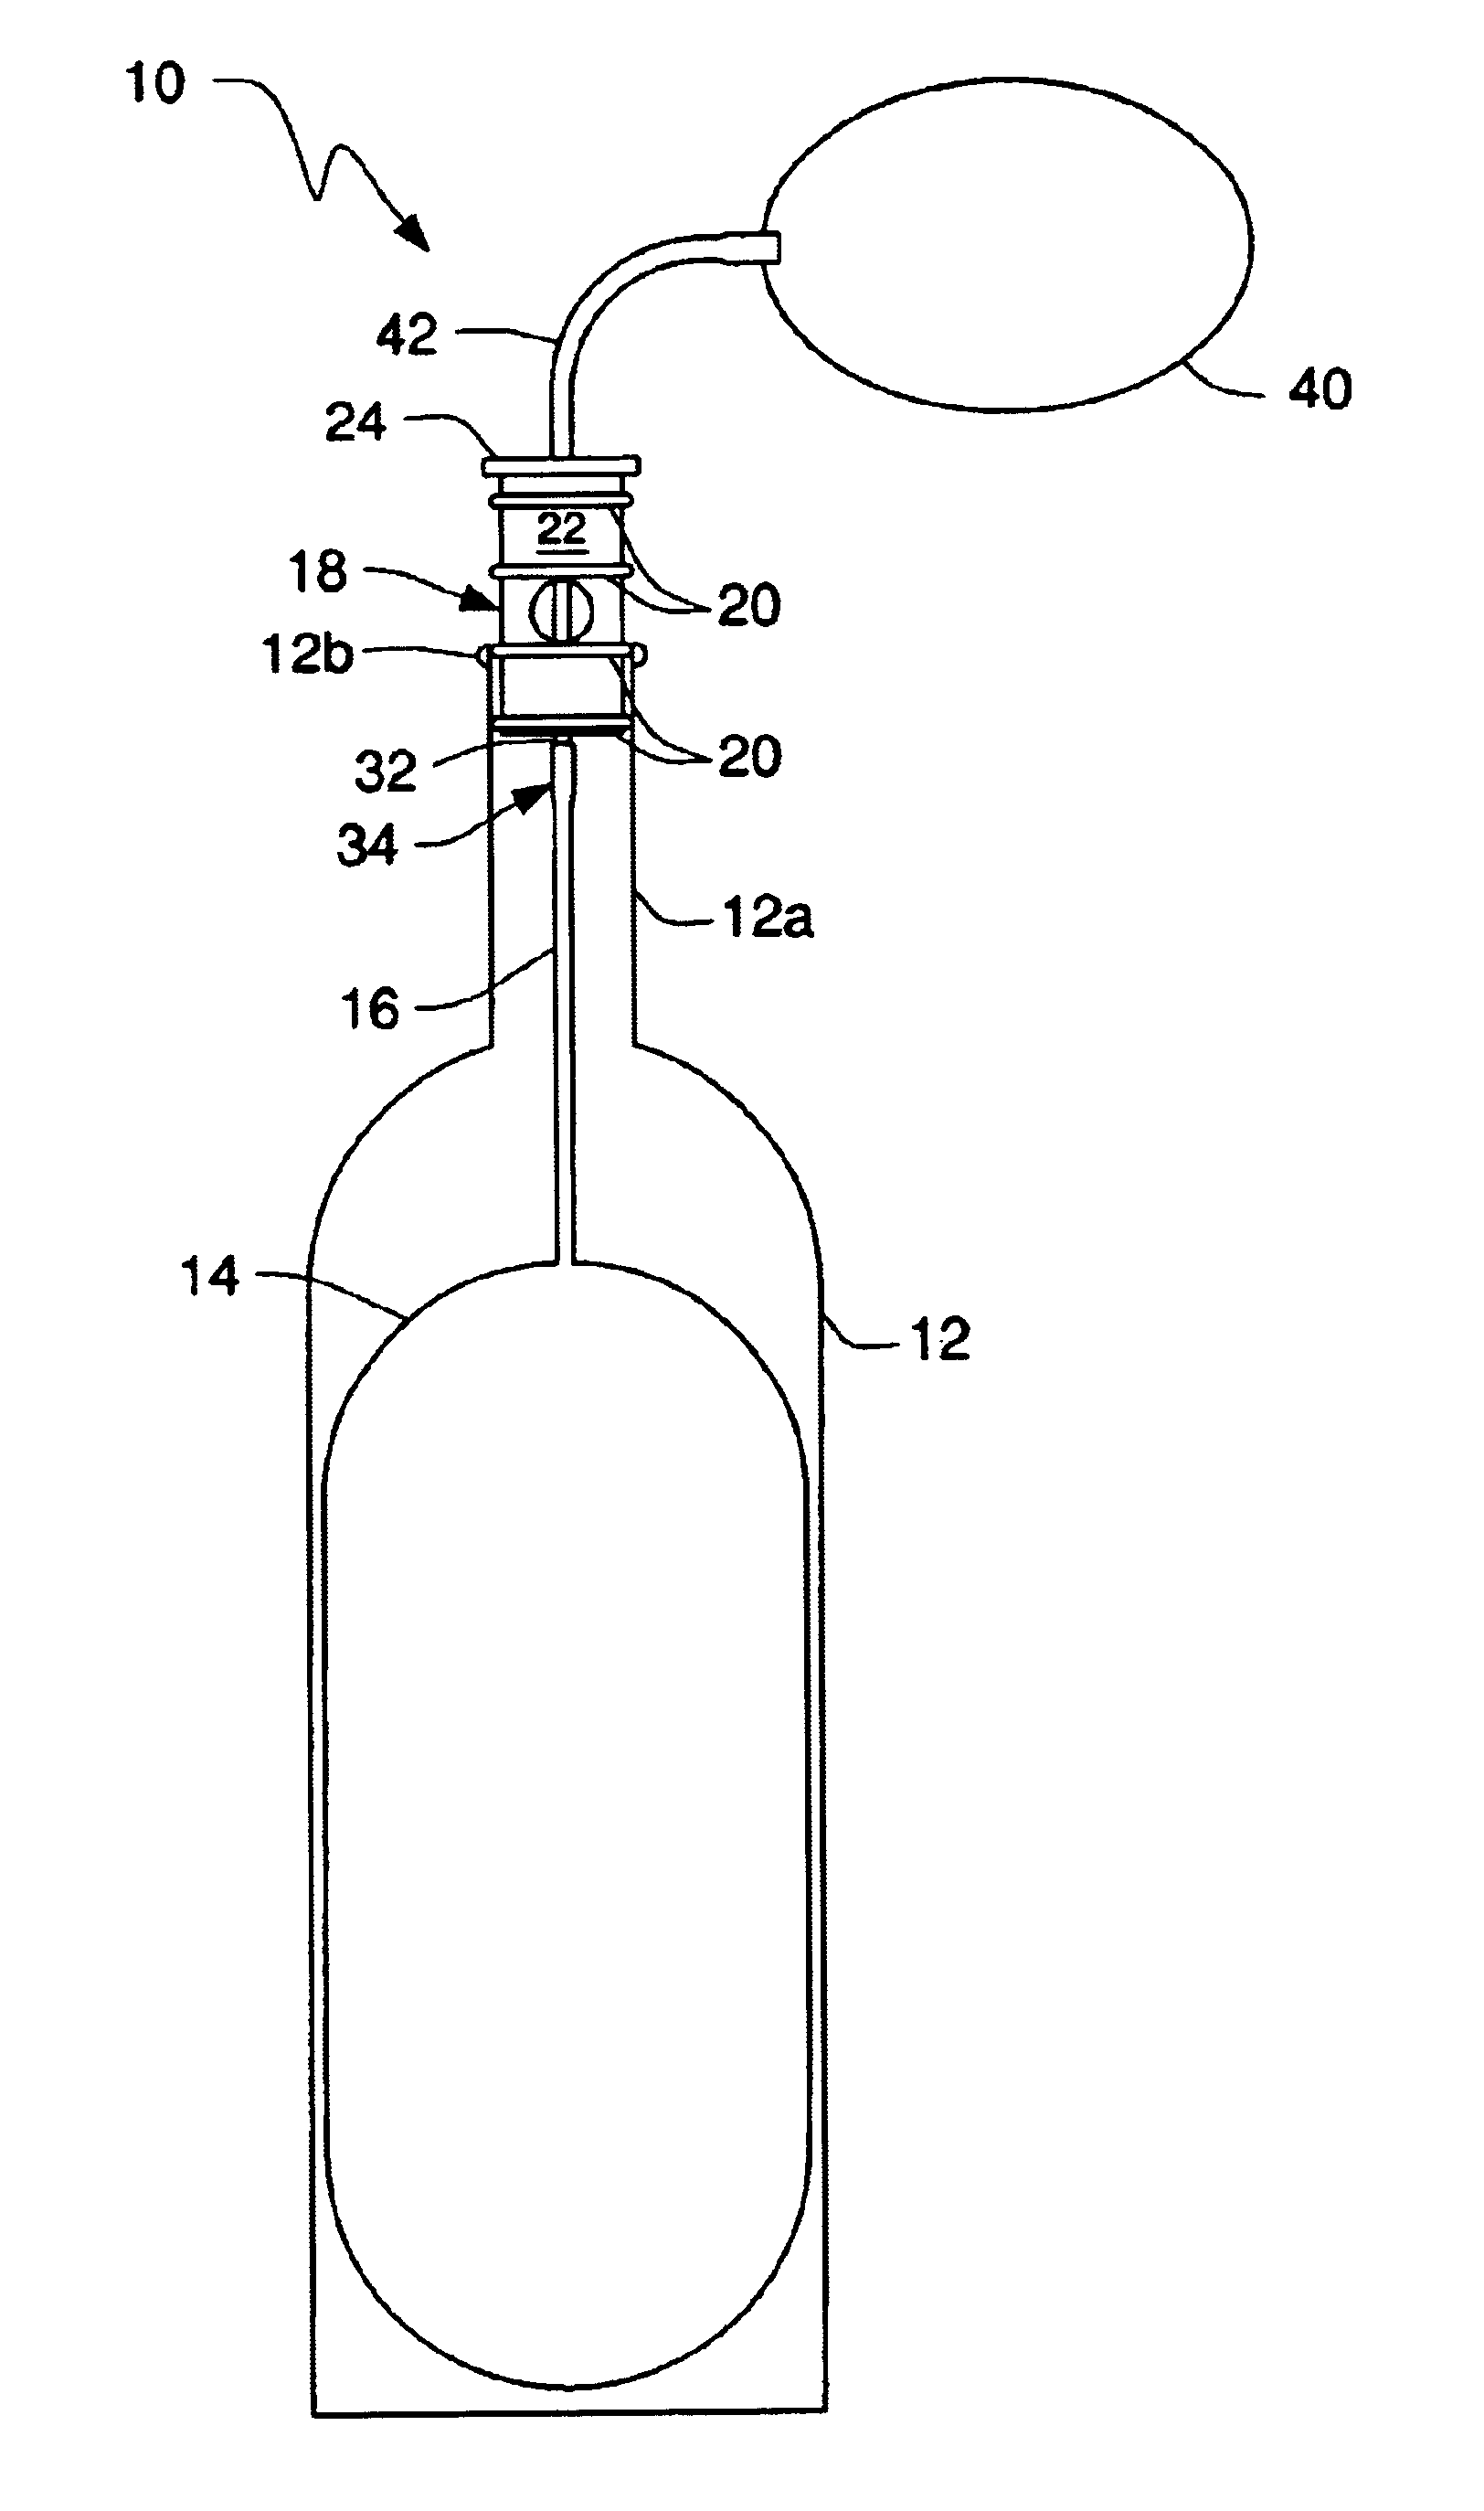 Air barrier device for protecting liquid fluids in opened containers